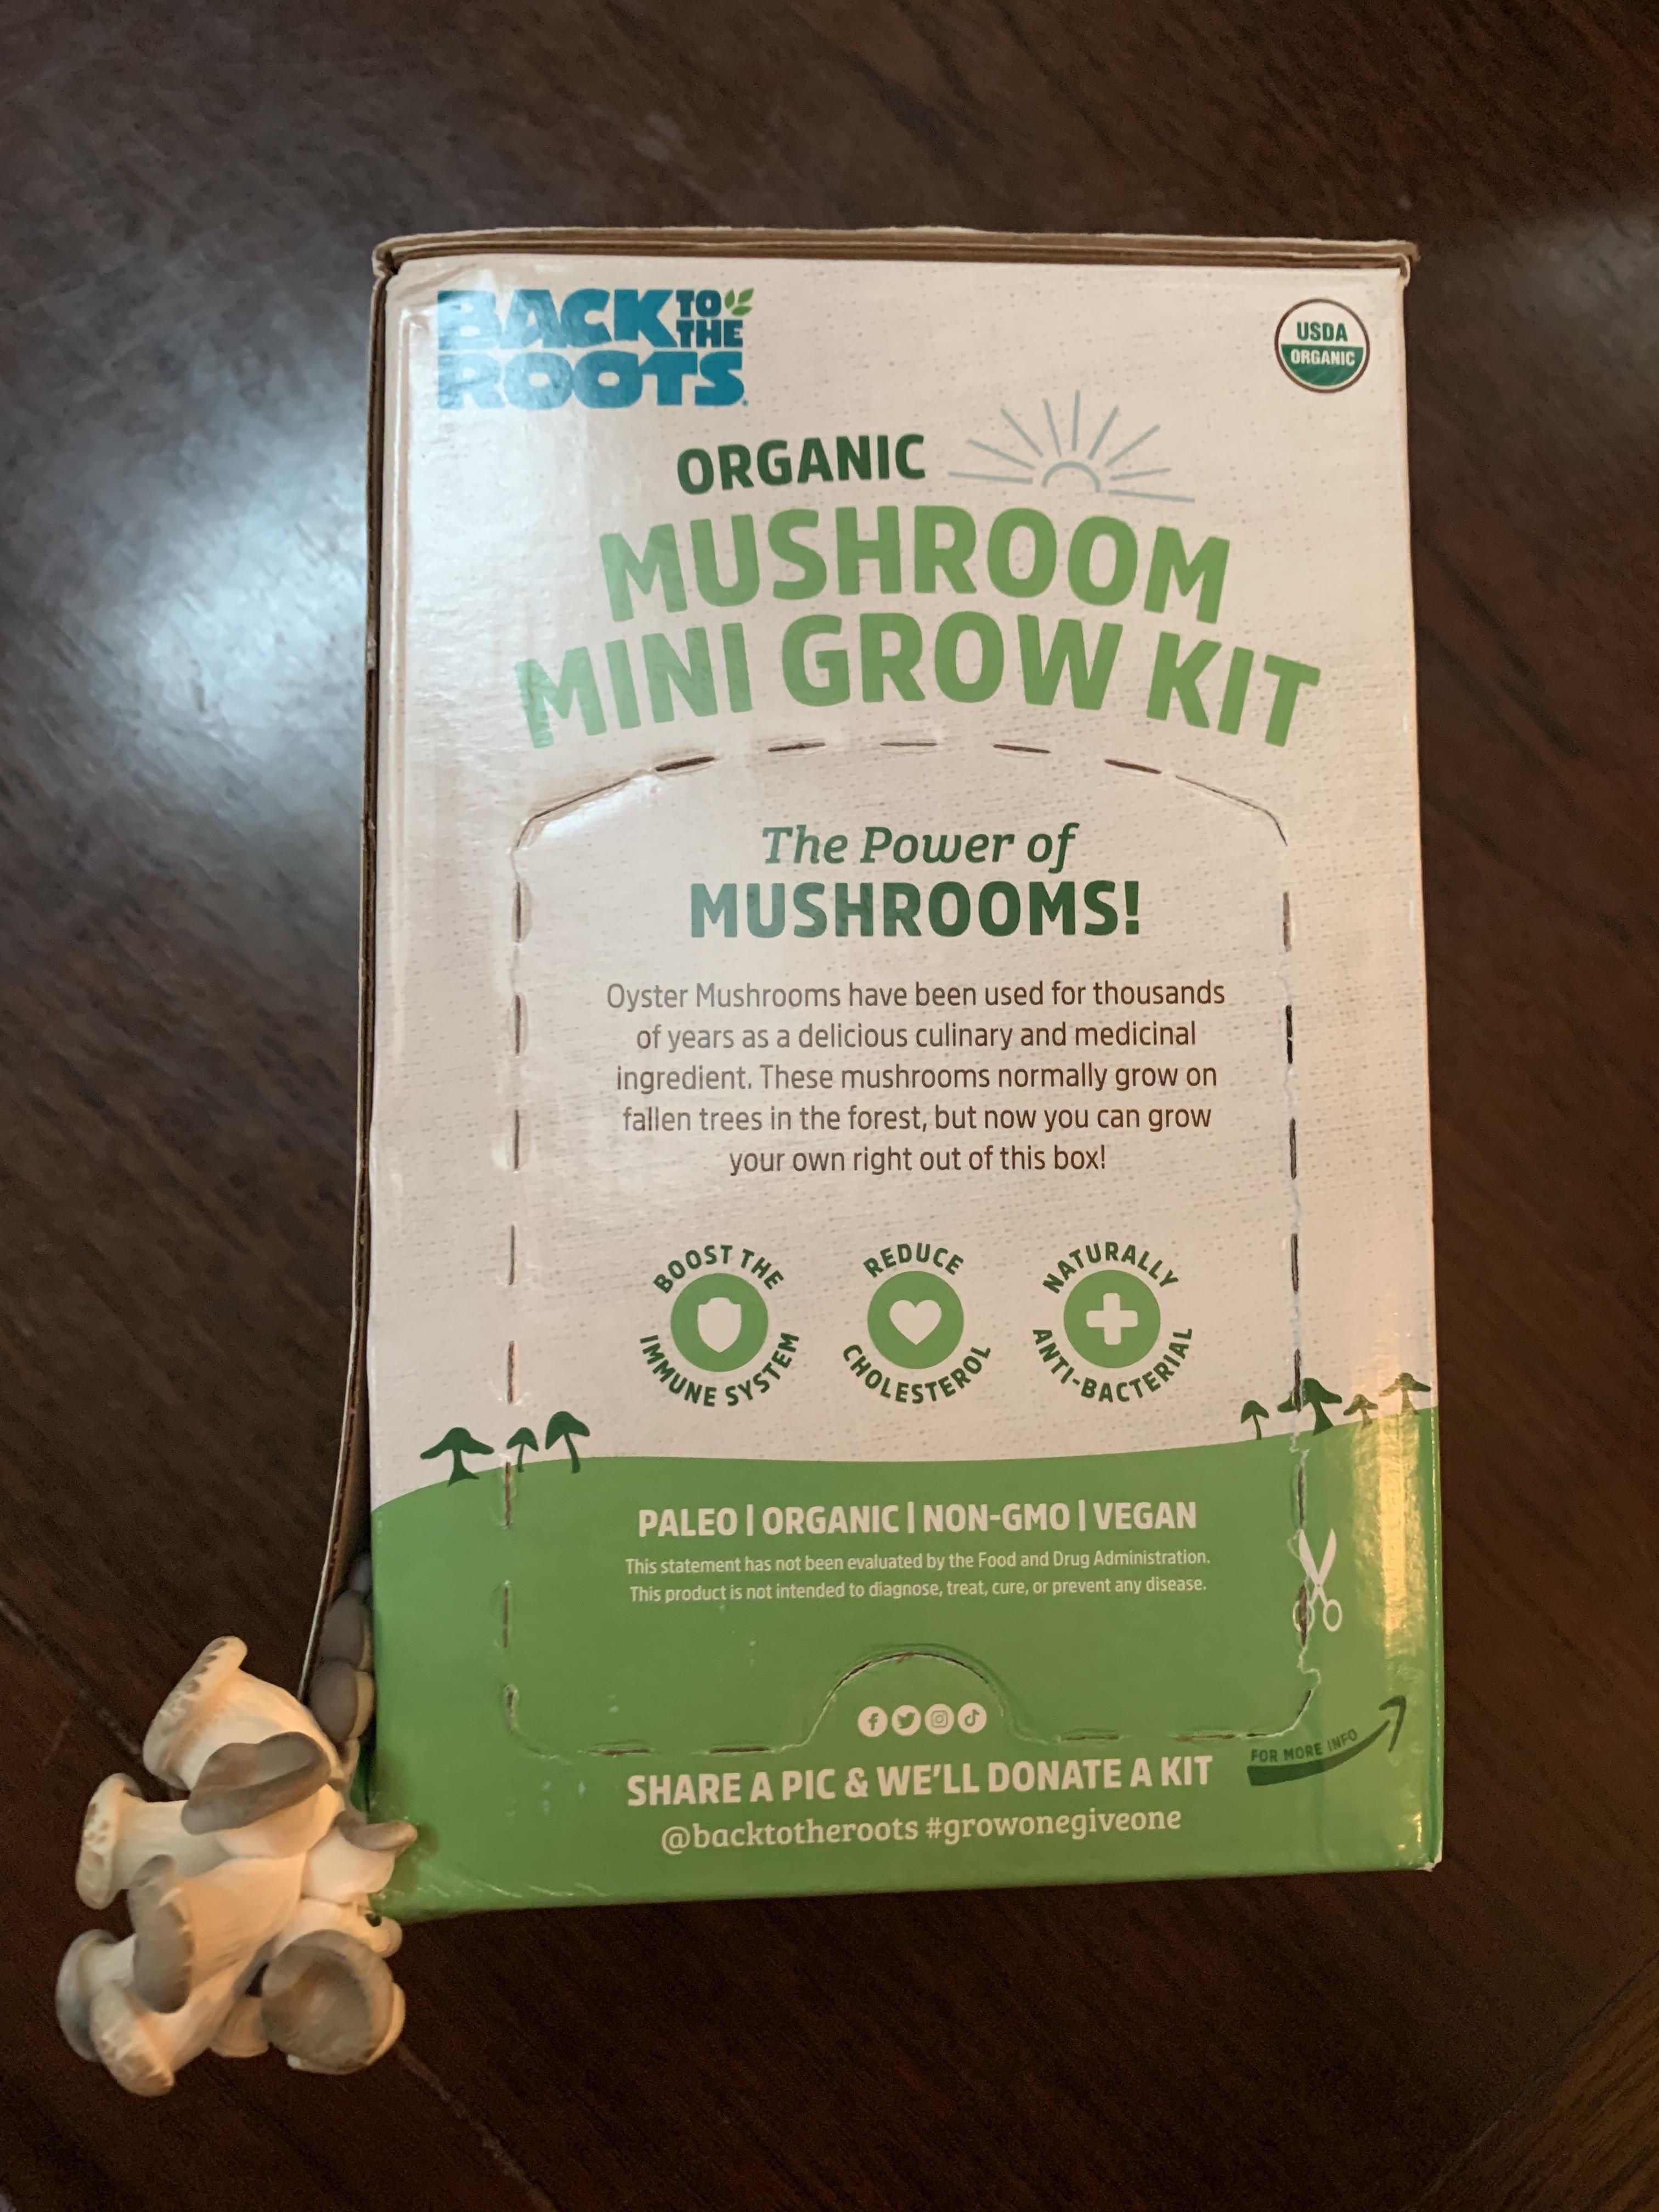 My mushroom growing kit got tired of waiting for me to set it up properly.